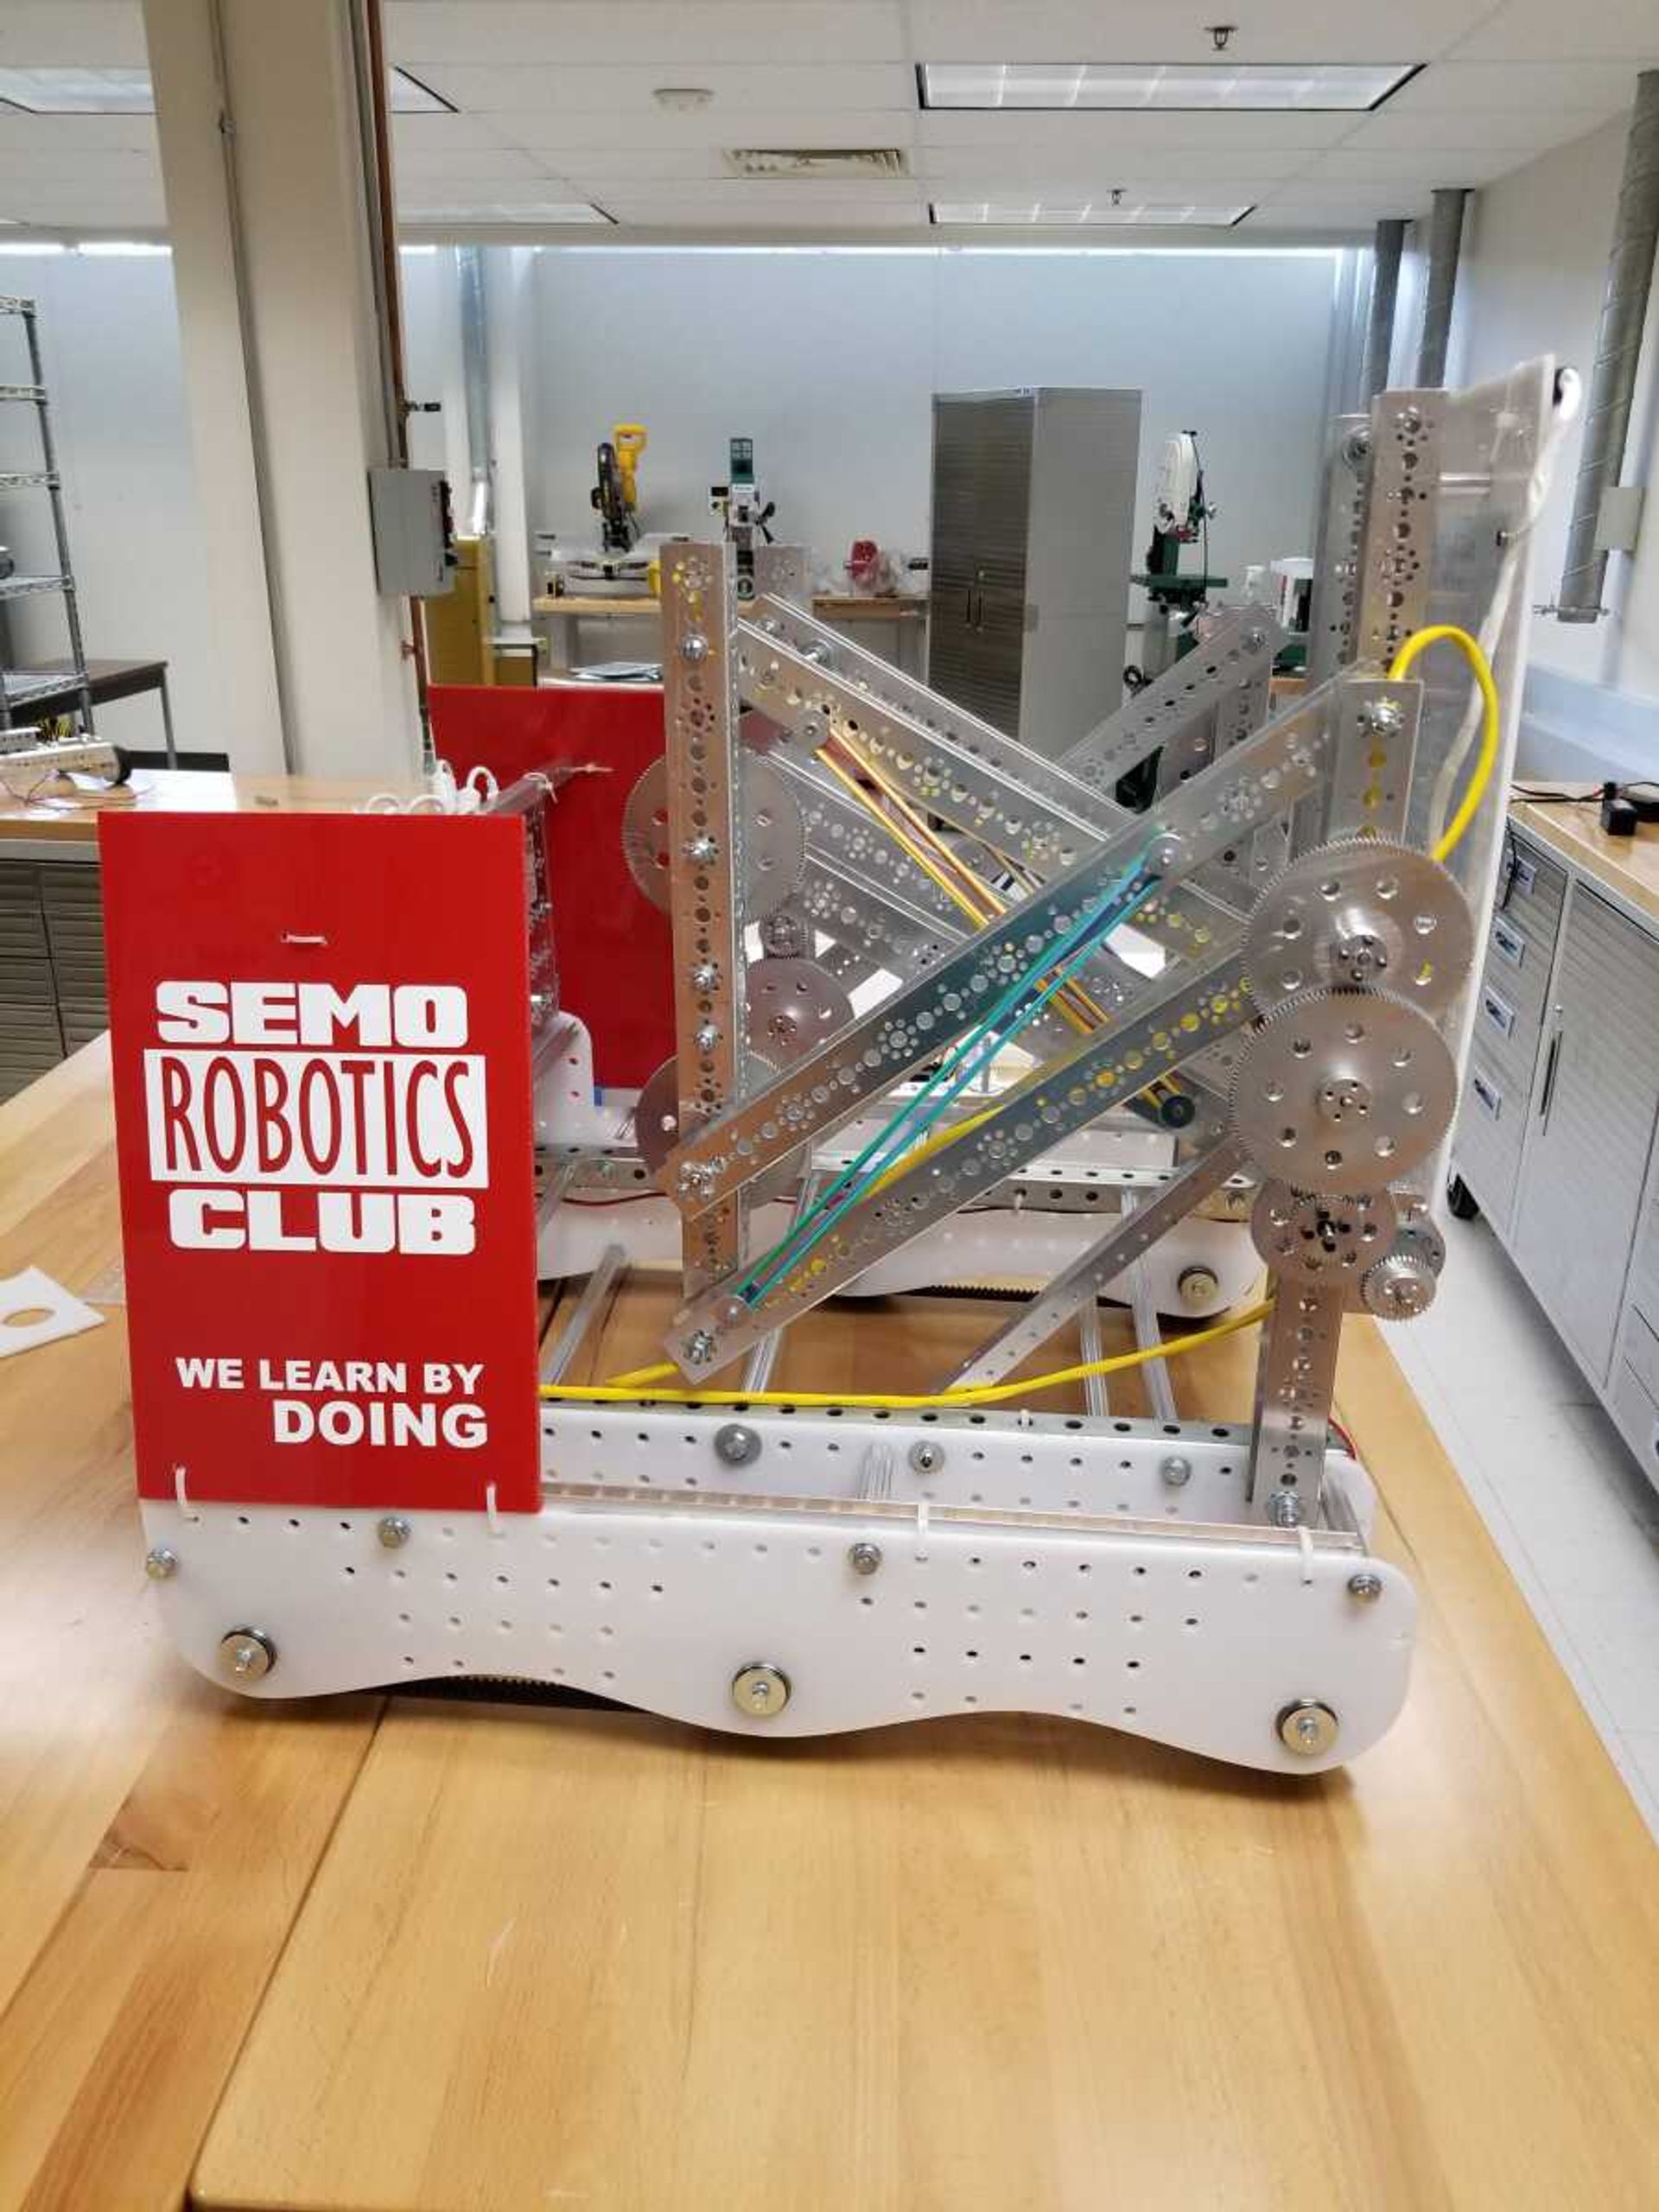 Close-ups of the Southeast Robotics club robot without the extended arms.